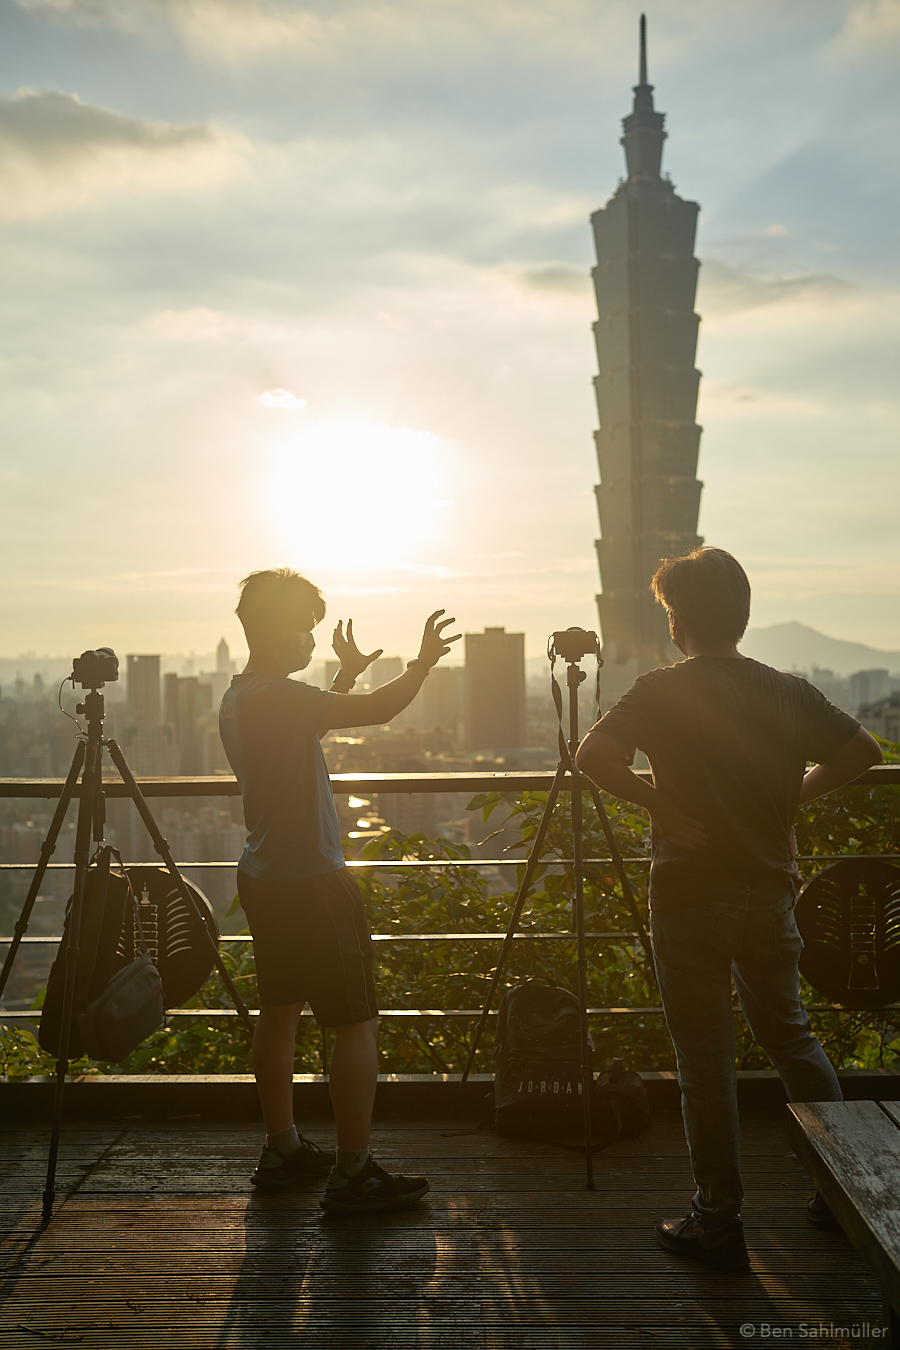 Two photographers standing on a platform, the low sun and Taipei 101 in the background. The photographers have their cameras on tripod next to them and are discussing energetically, one of them gesturing with his hands.